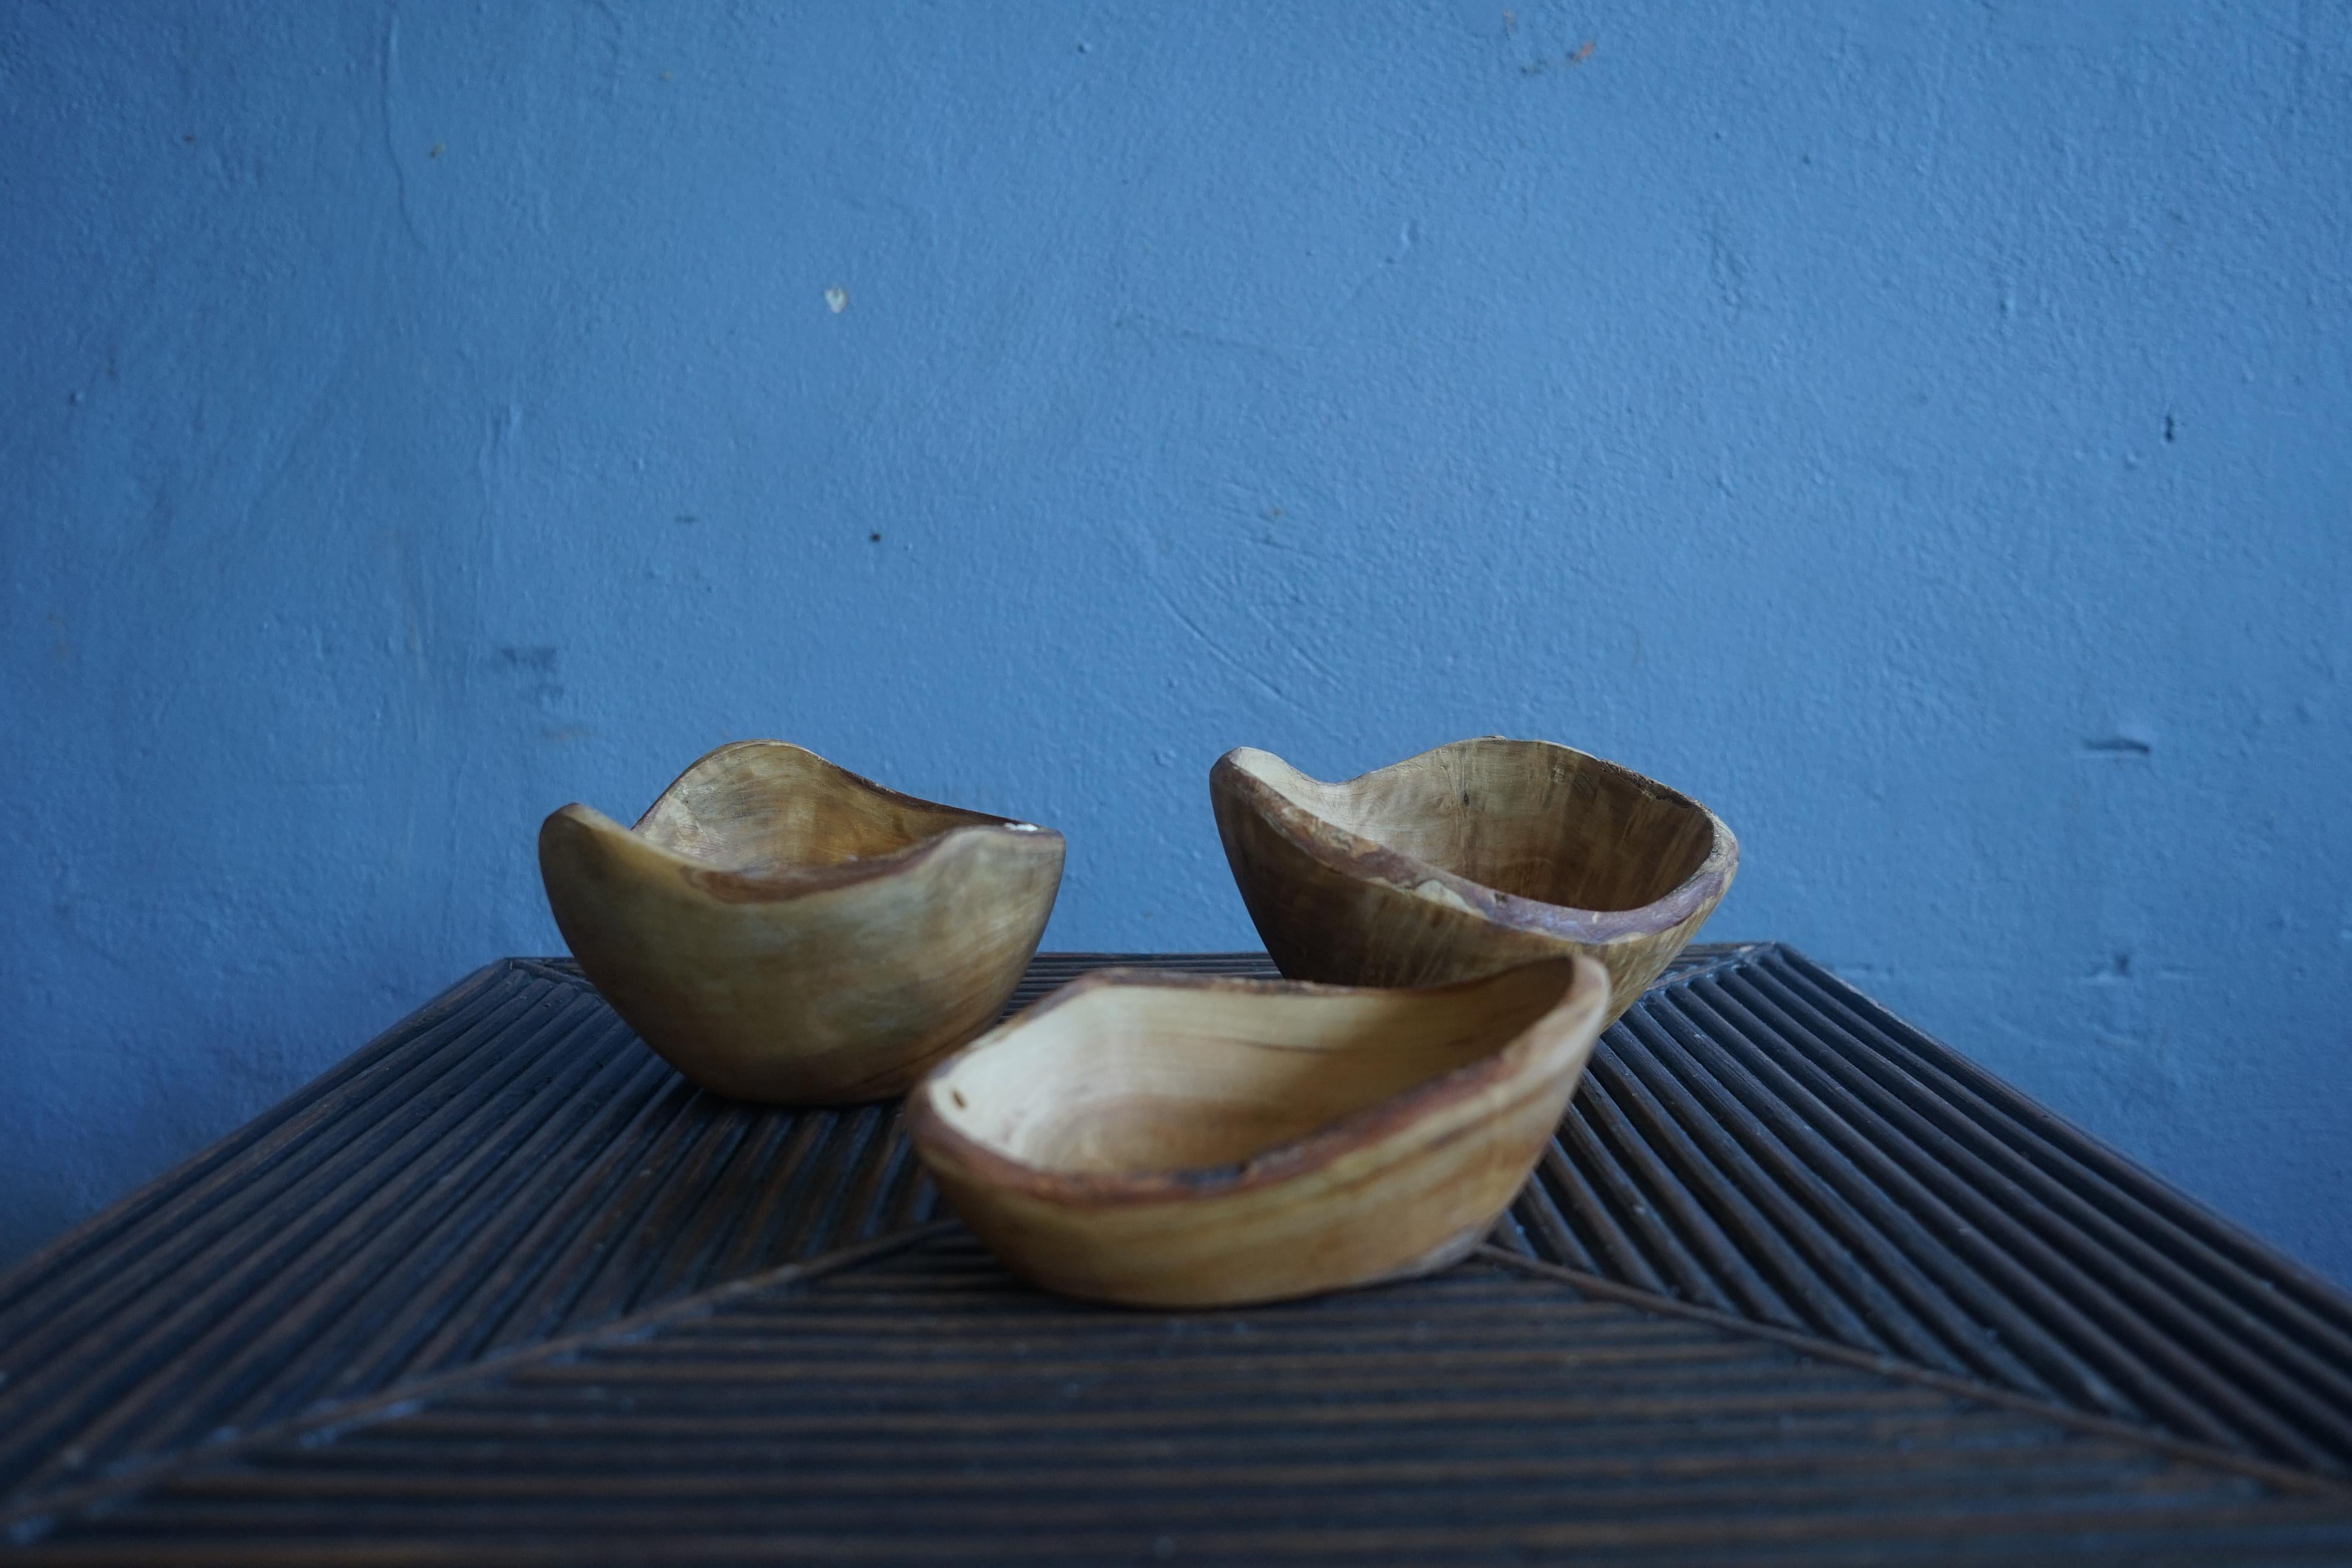 Rare Collection of Swedish’s organic wooden bowl from the 1940s.

Beautiful collection of Swedish’s wooden bowls from the 1940s, the bowls are made in a beautiful light wood with a beautiful dark texture.

The bowls are the perfect decorative